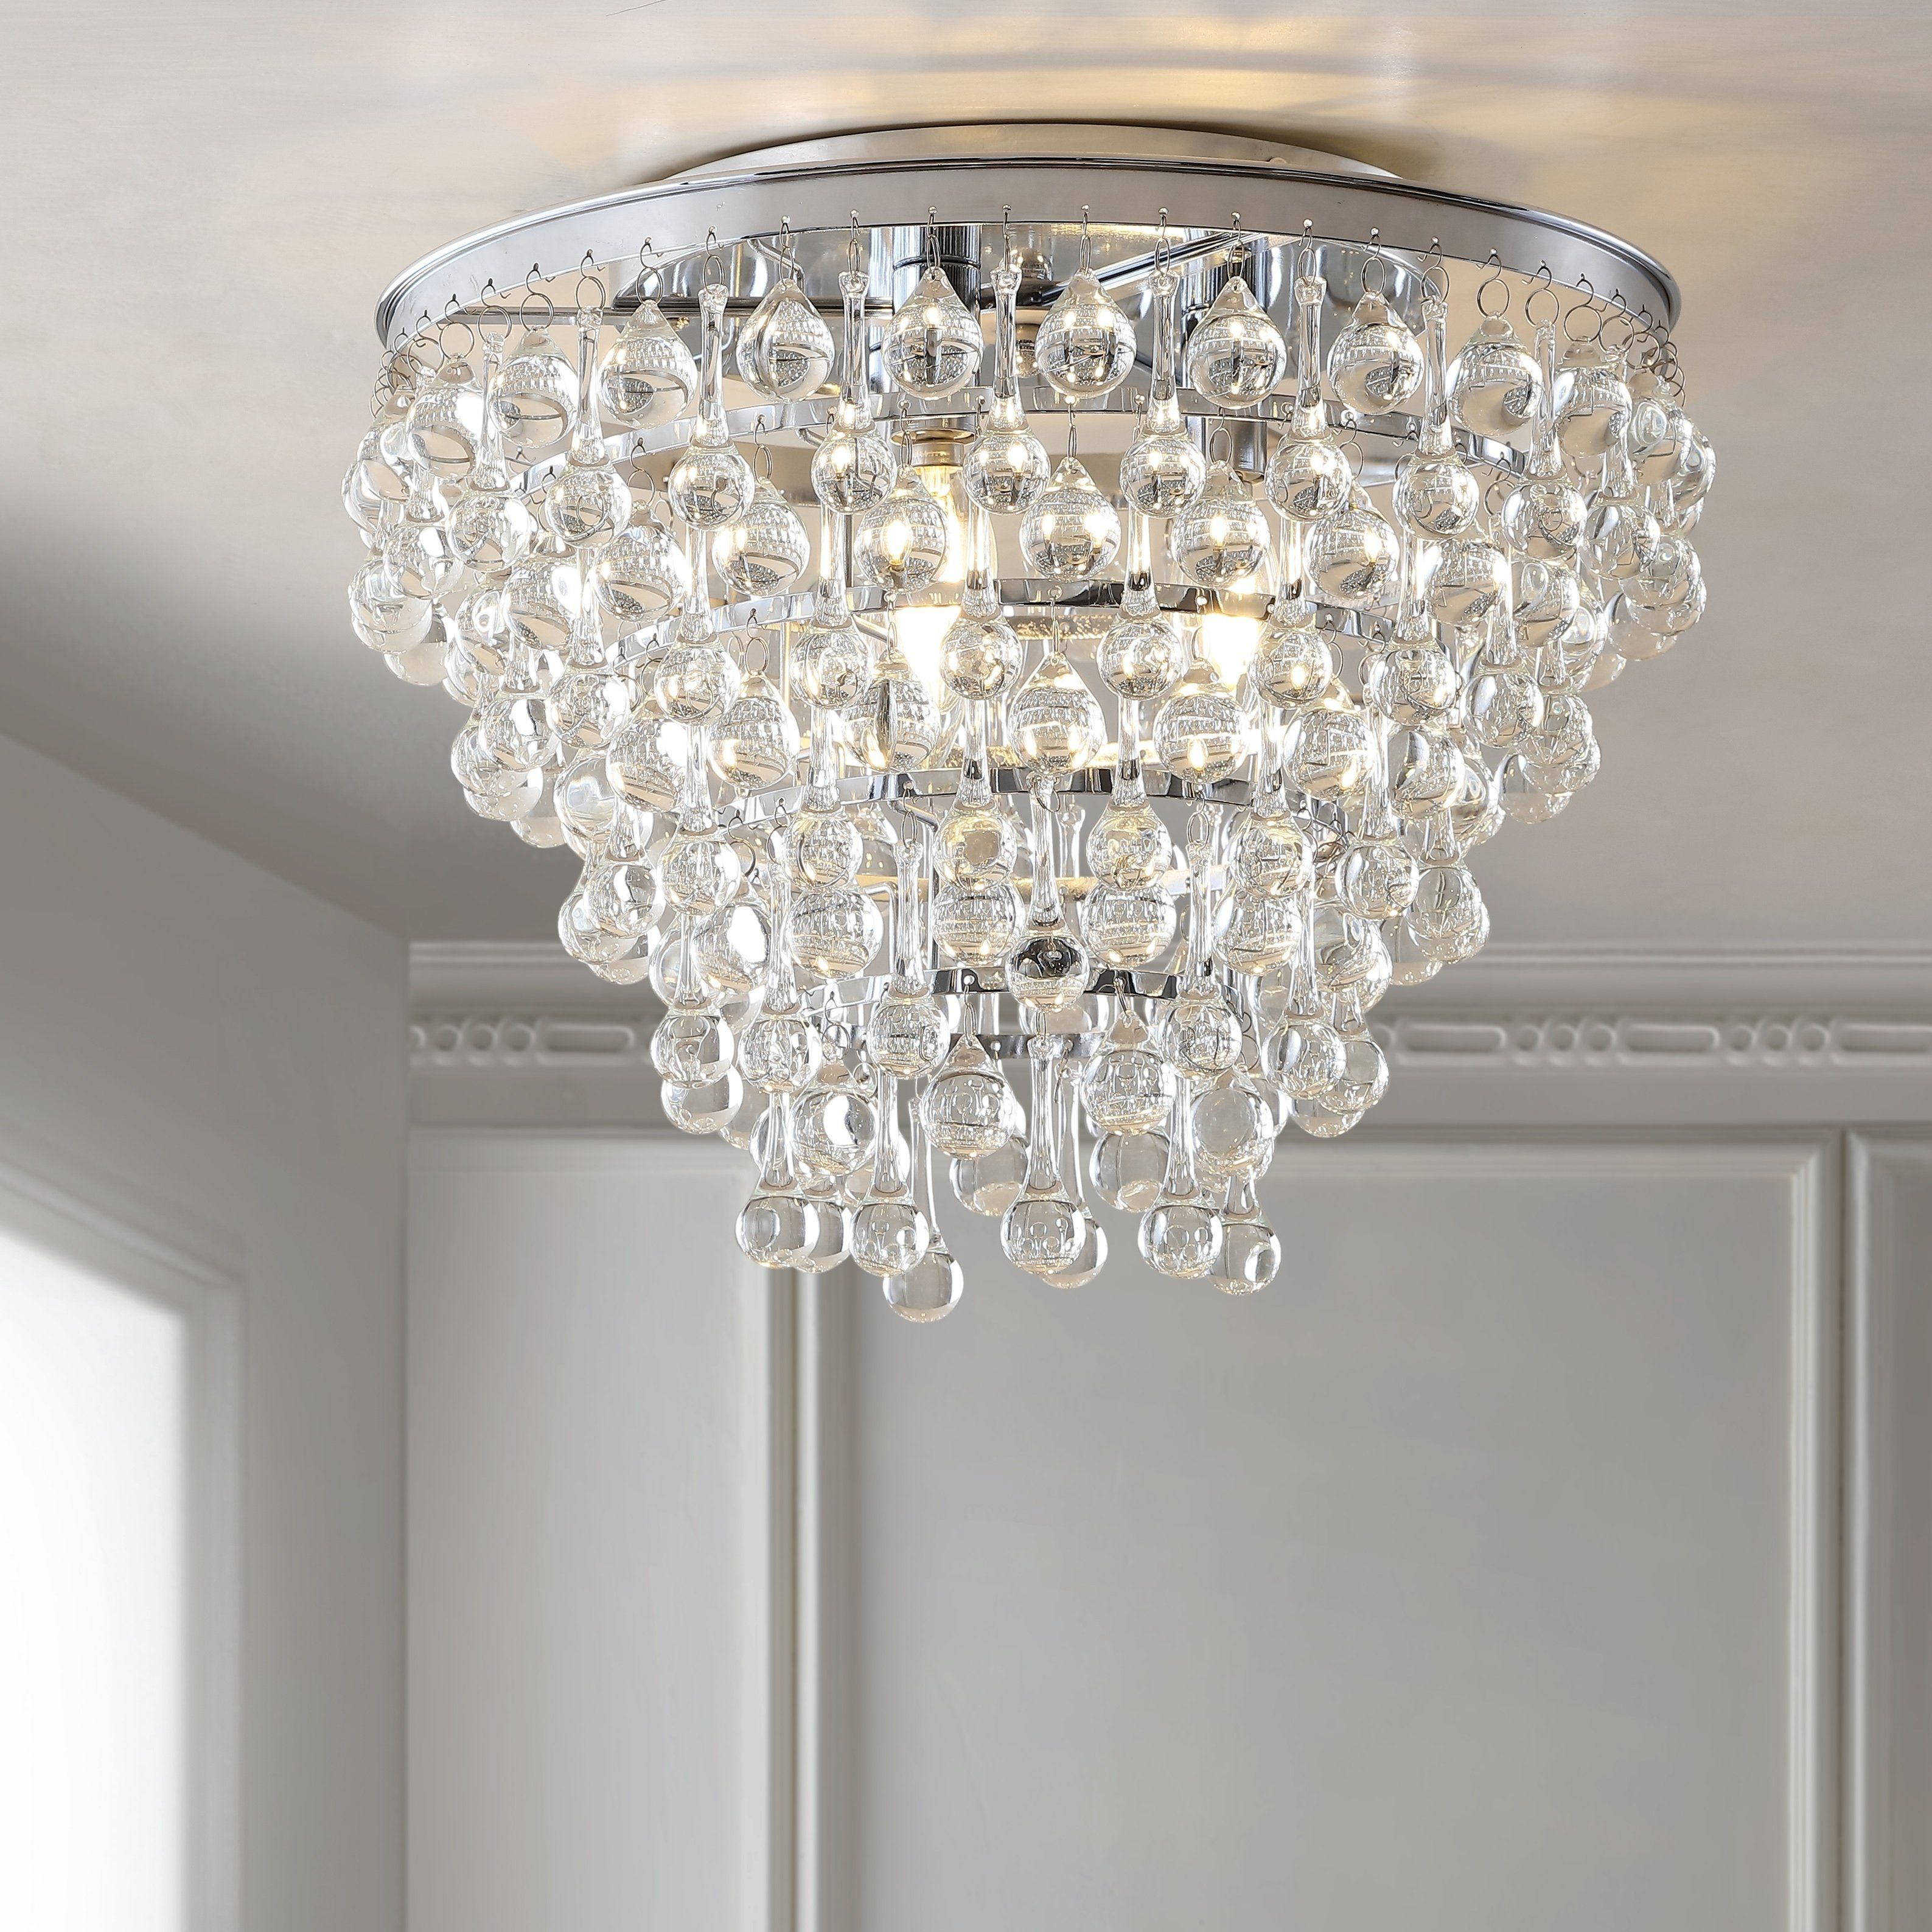 Toronto 16" Metal/crystal Led Flush Mount, Chrome,silver Within Verdell 5 Light Crystal Chandeliers (View 24 of 30)